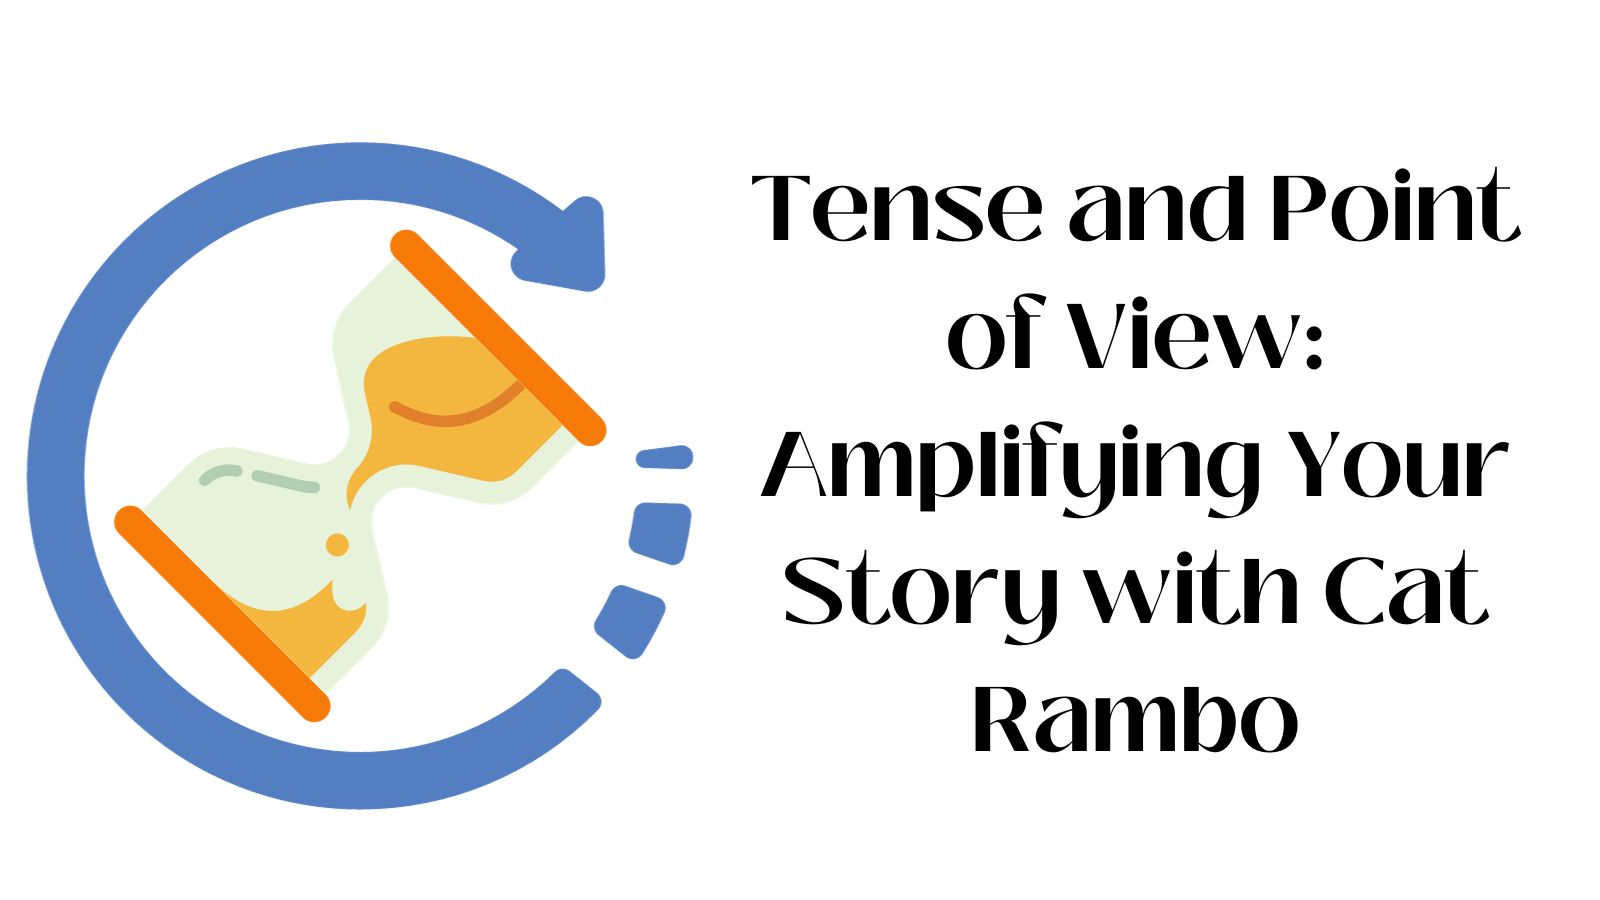 Tense and Point of View: Amplifying Your Story with Cat Rambo